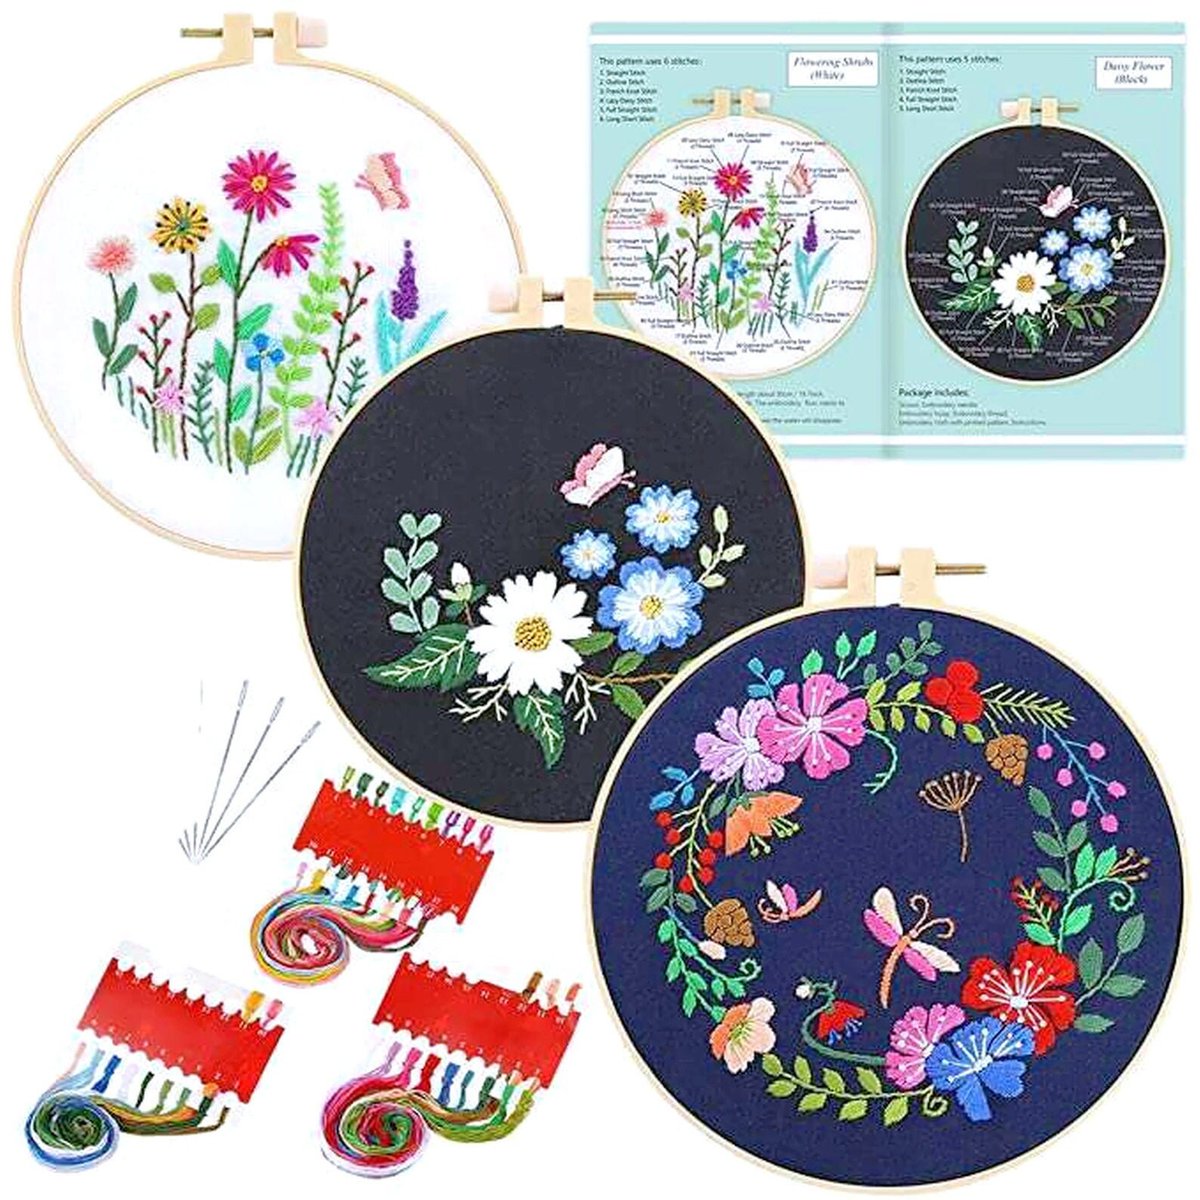 Excited to share the latest addition to my #etsy shop: Lot of 3 botanical embroidery kites, Slow stitch kits with patterns,hobby kit adult,easy embroidery kit,easy embroidery patterns etsy.me/3WHSpbb #housewarming #mothersday #kidscrafts #embroiderypattern #lea